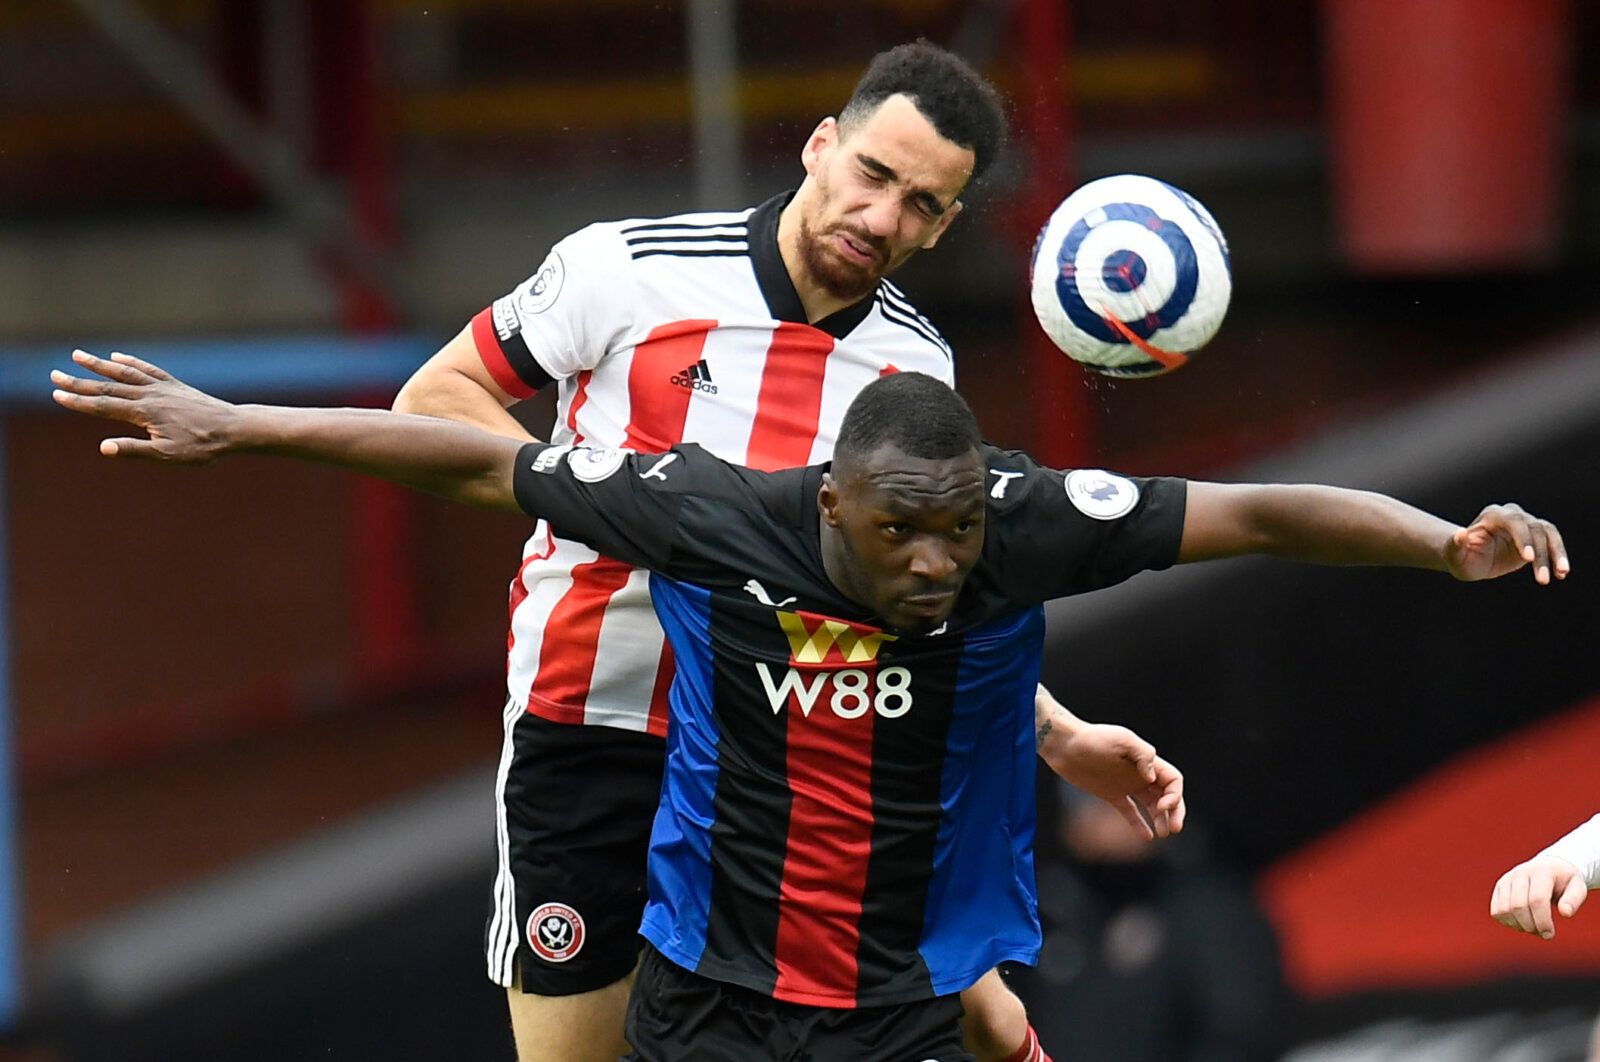 Soccer Football - Premier League - Sheffield United v Crystal Palace - Bramall Lane, Sheffield, Britain - May 8, 2021 Crystal Palace's Christian Benteke in action with Sheffield United's Kean Bryan Pool via REUTERS/Peter Powell EDITORIAL USE ONLY. No use with unauthorized audio, video, data, fixture lists, club/league logos or 'live' services. Online in-match use limited to 75 images, no video emulation. No use in betting, games or single club /league/player publications.  Please contact your ac